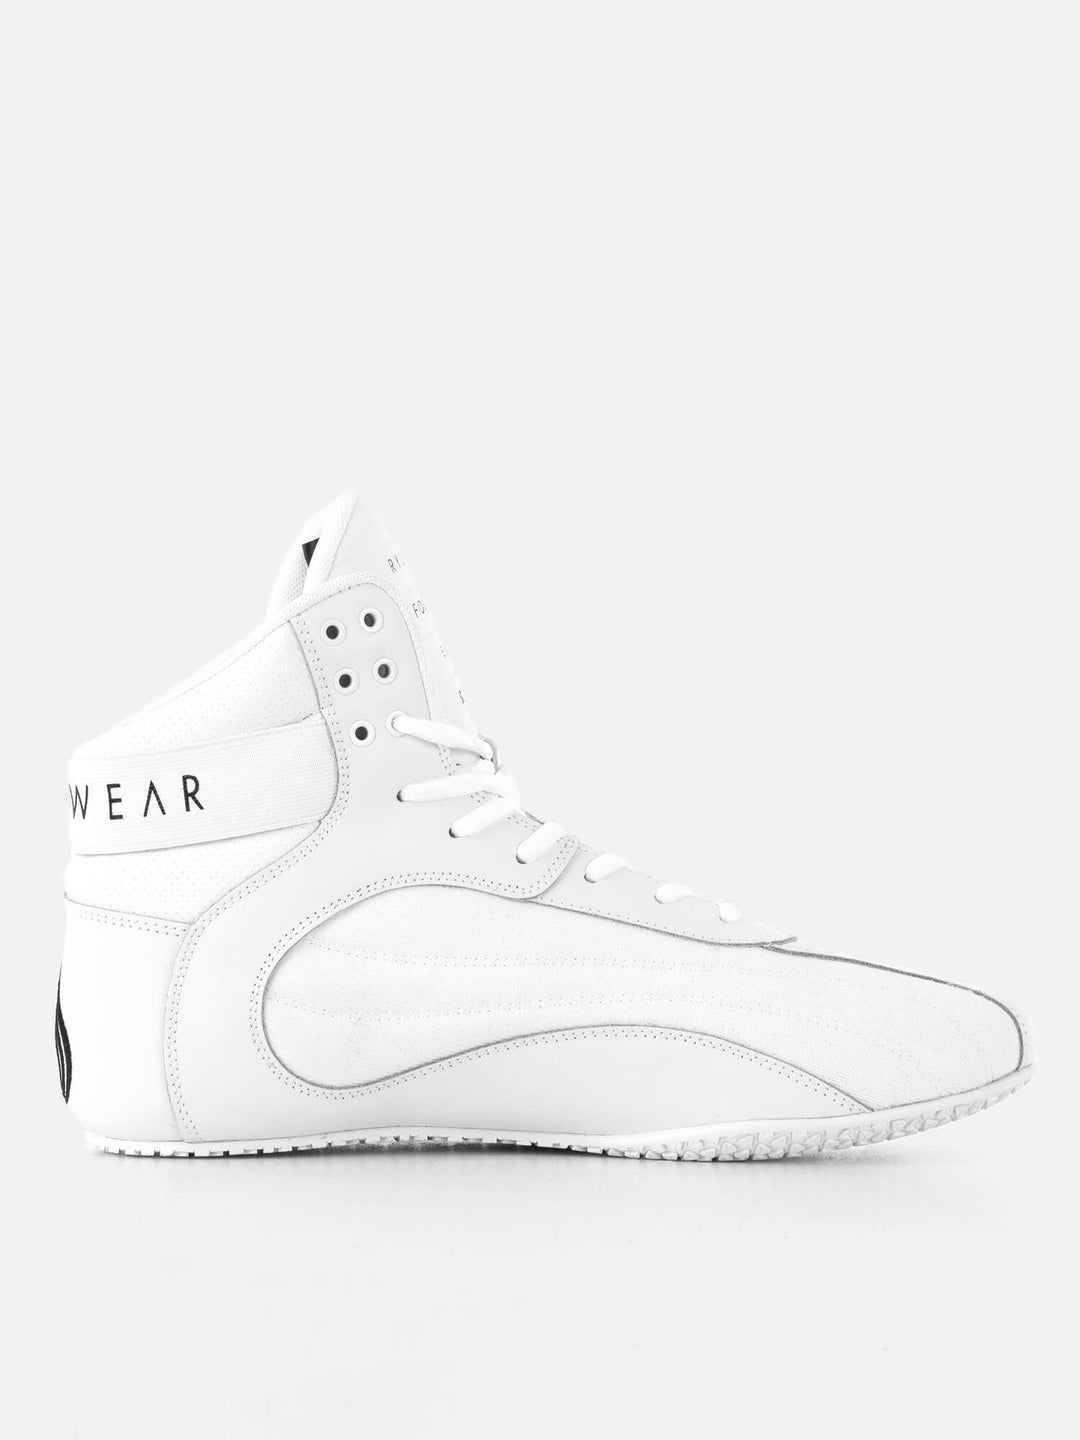 D-Mak Block - White Weightlifting Shoes